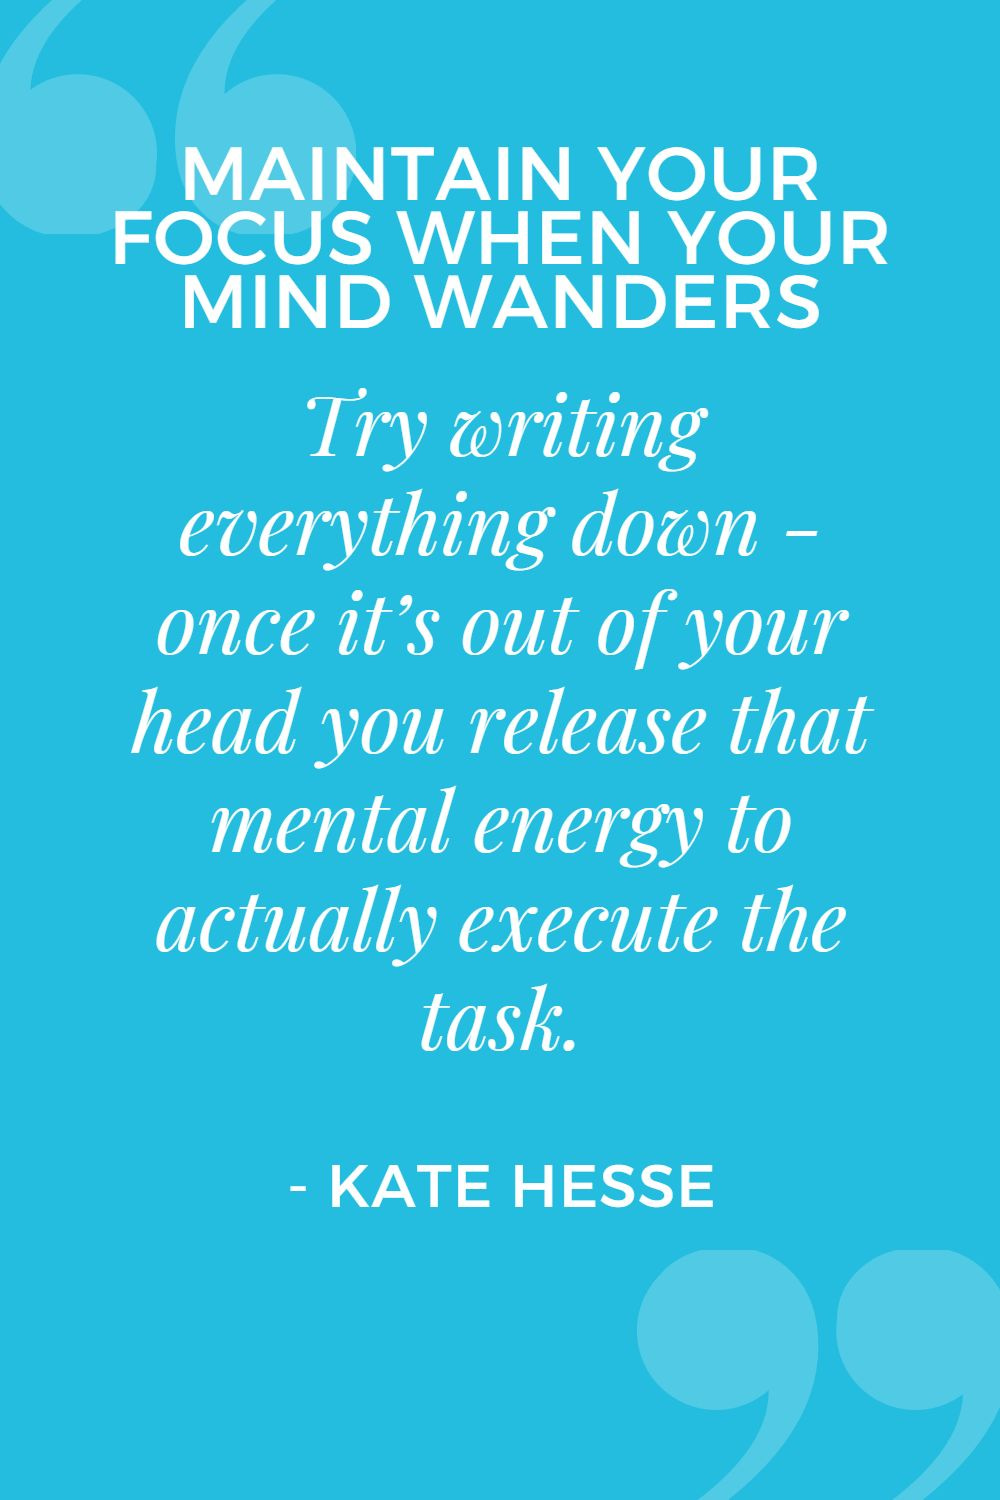 Try writing everything down - once it's out of your head, you release that mental energy to execute the task!